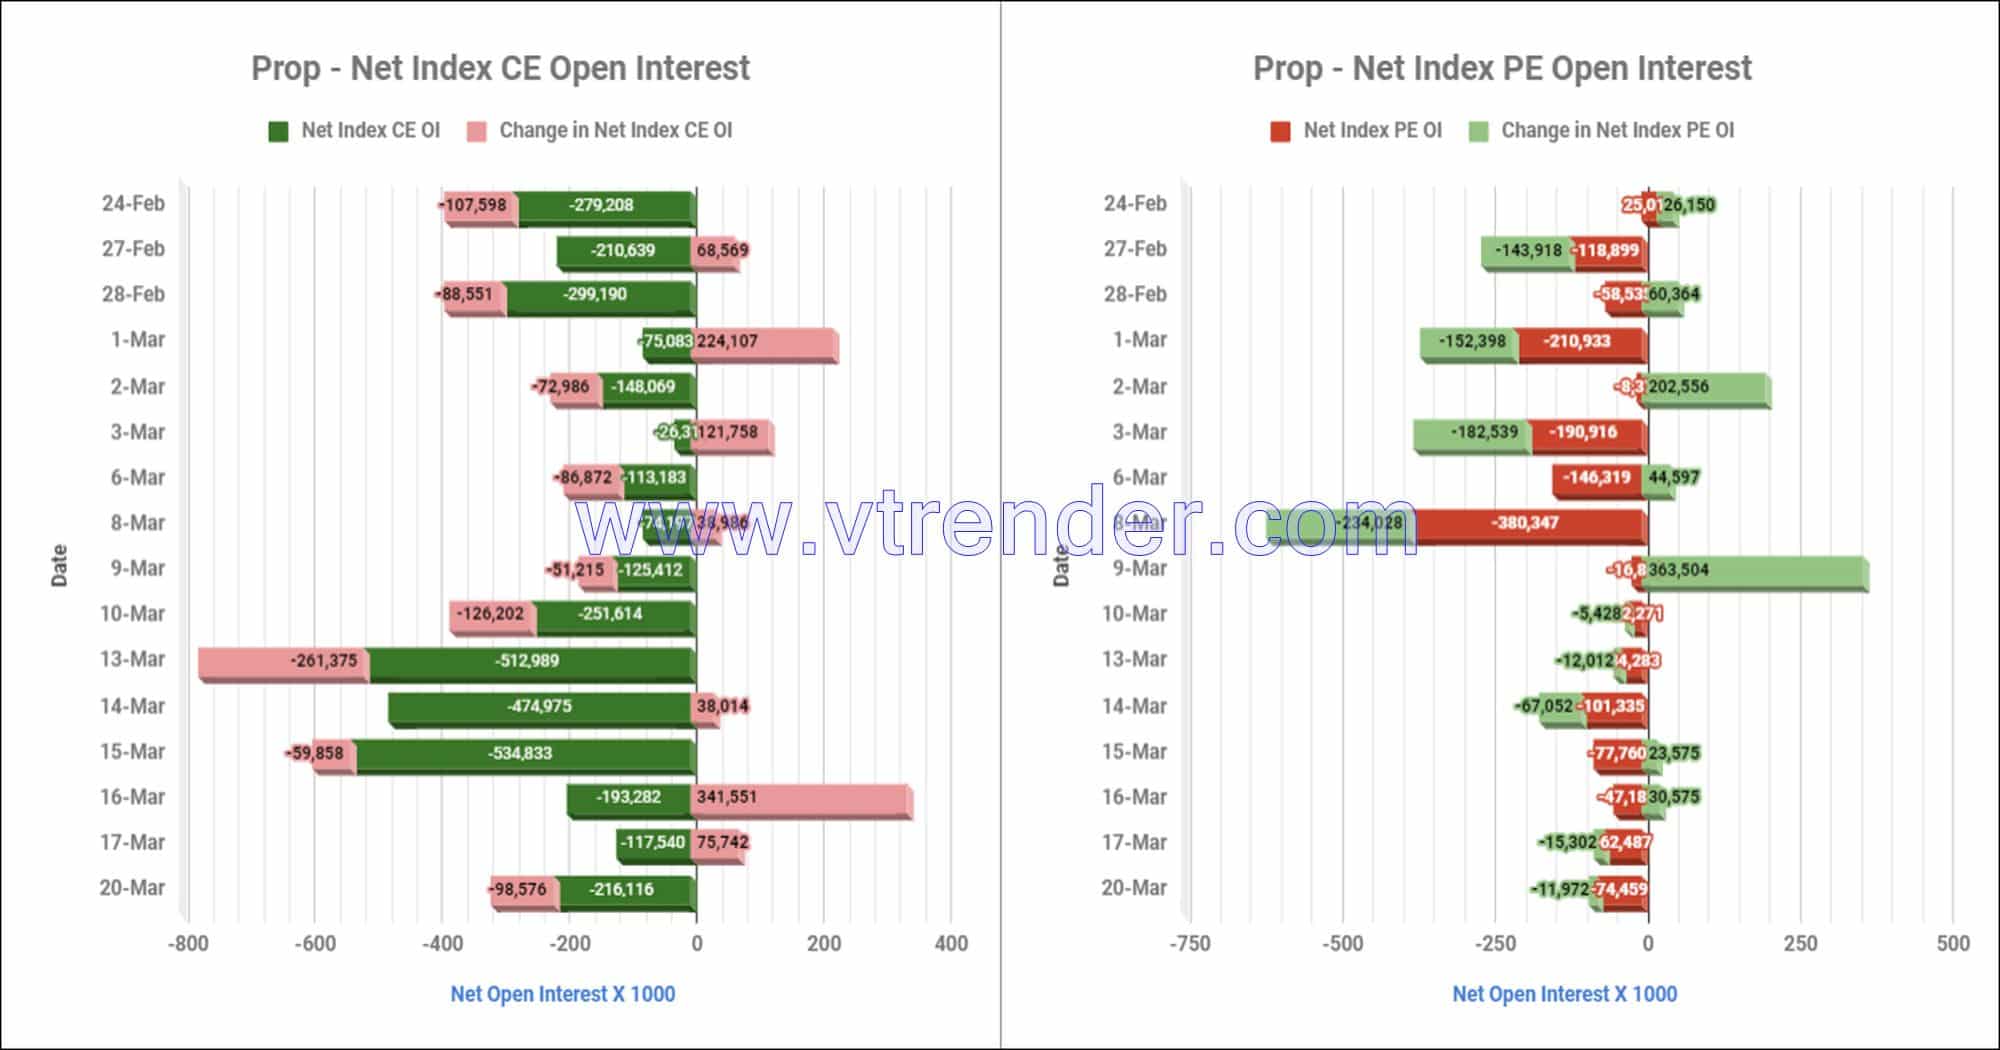 Proinop20Mar Participantwise Net Open Interest And Net Equity Investments – 20Th Mar 2023 Client, Equity, Fii, Index Futures, Index Options, Open Interest, Prop